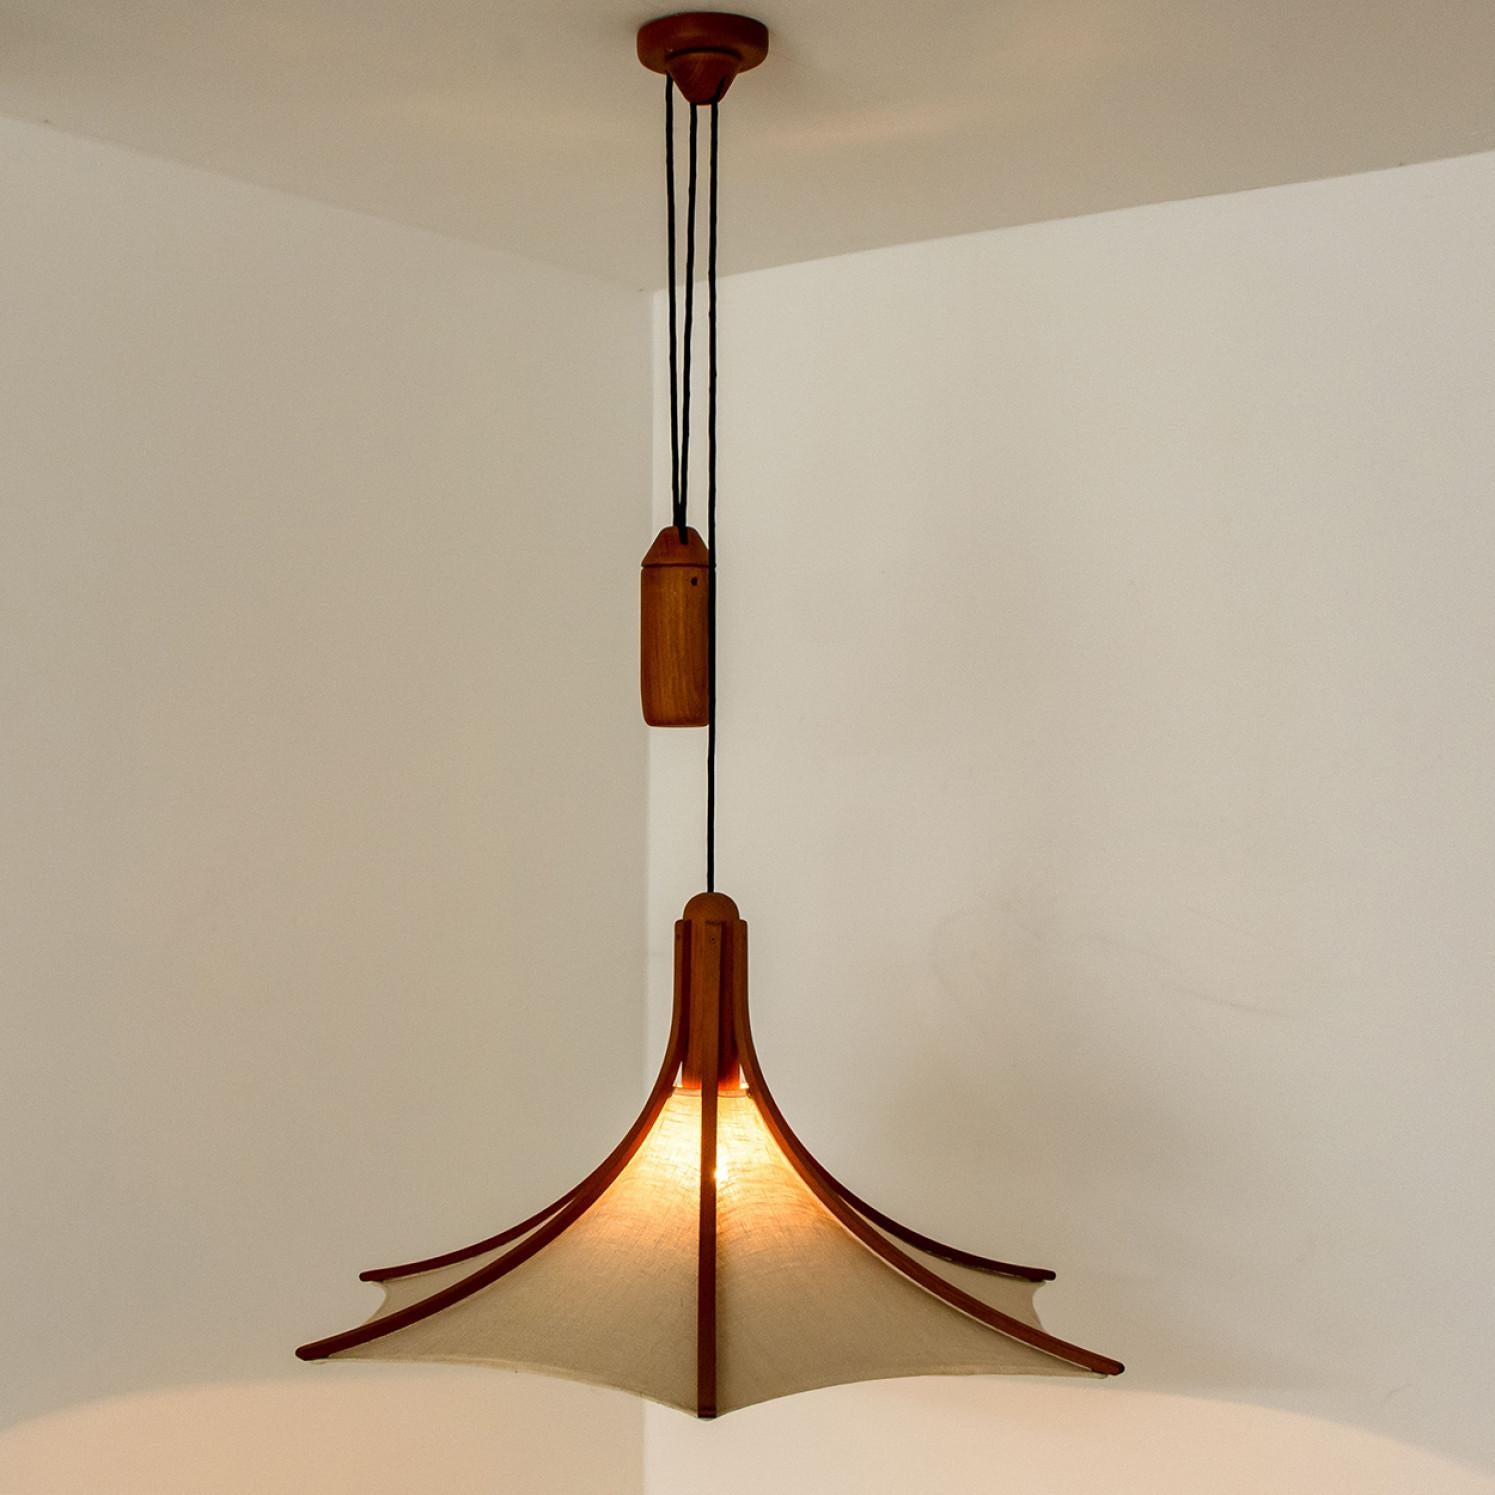 1 of the 2 Wooden Pendant Light with Textile Shade by Domus Germany, 1970s For Sale 13